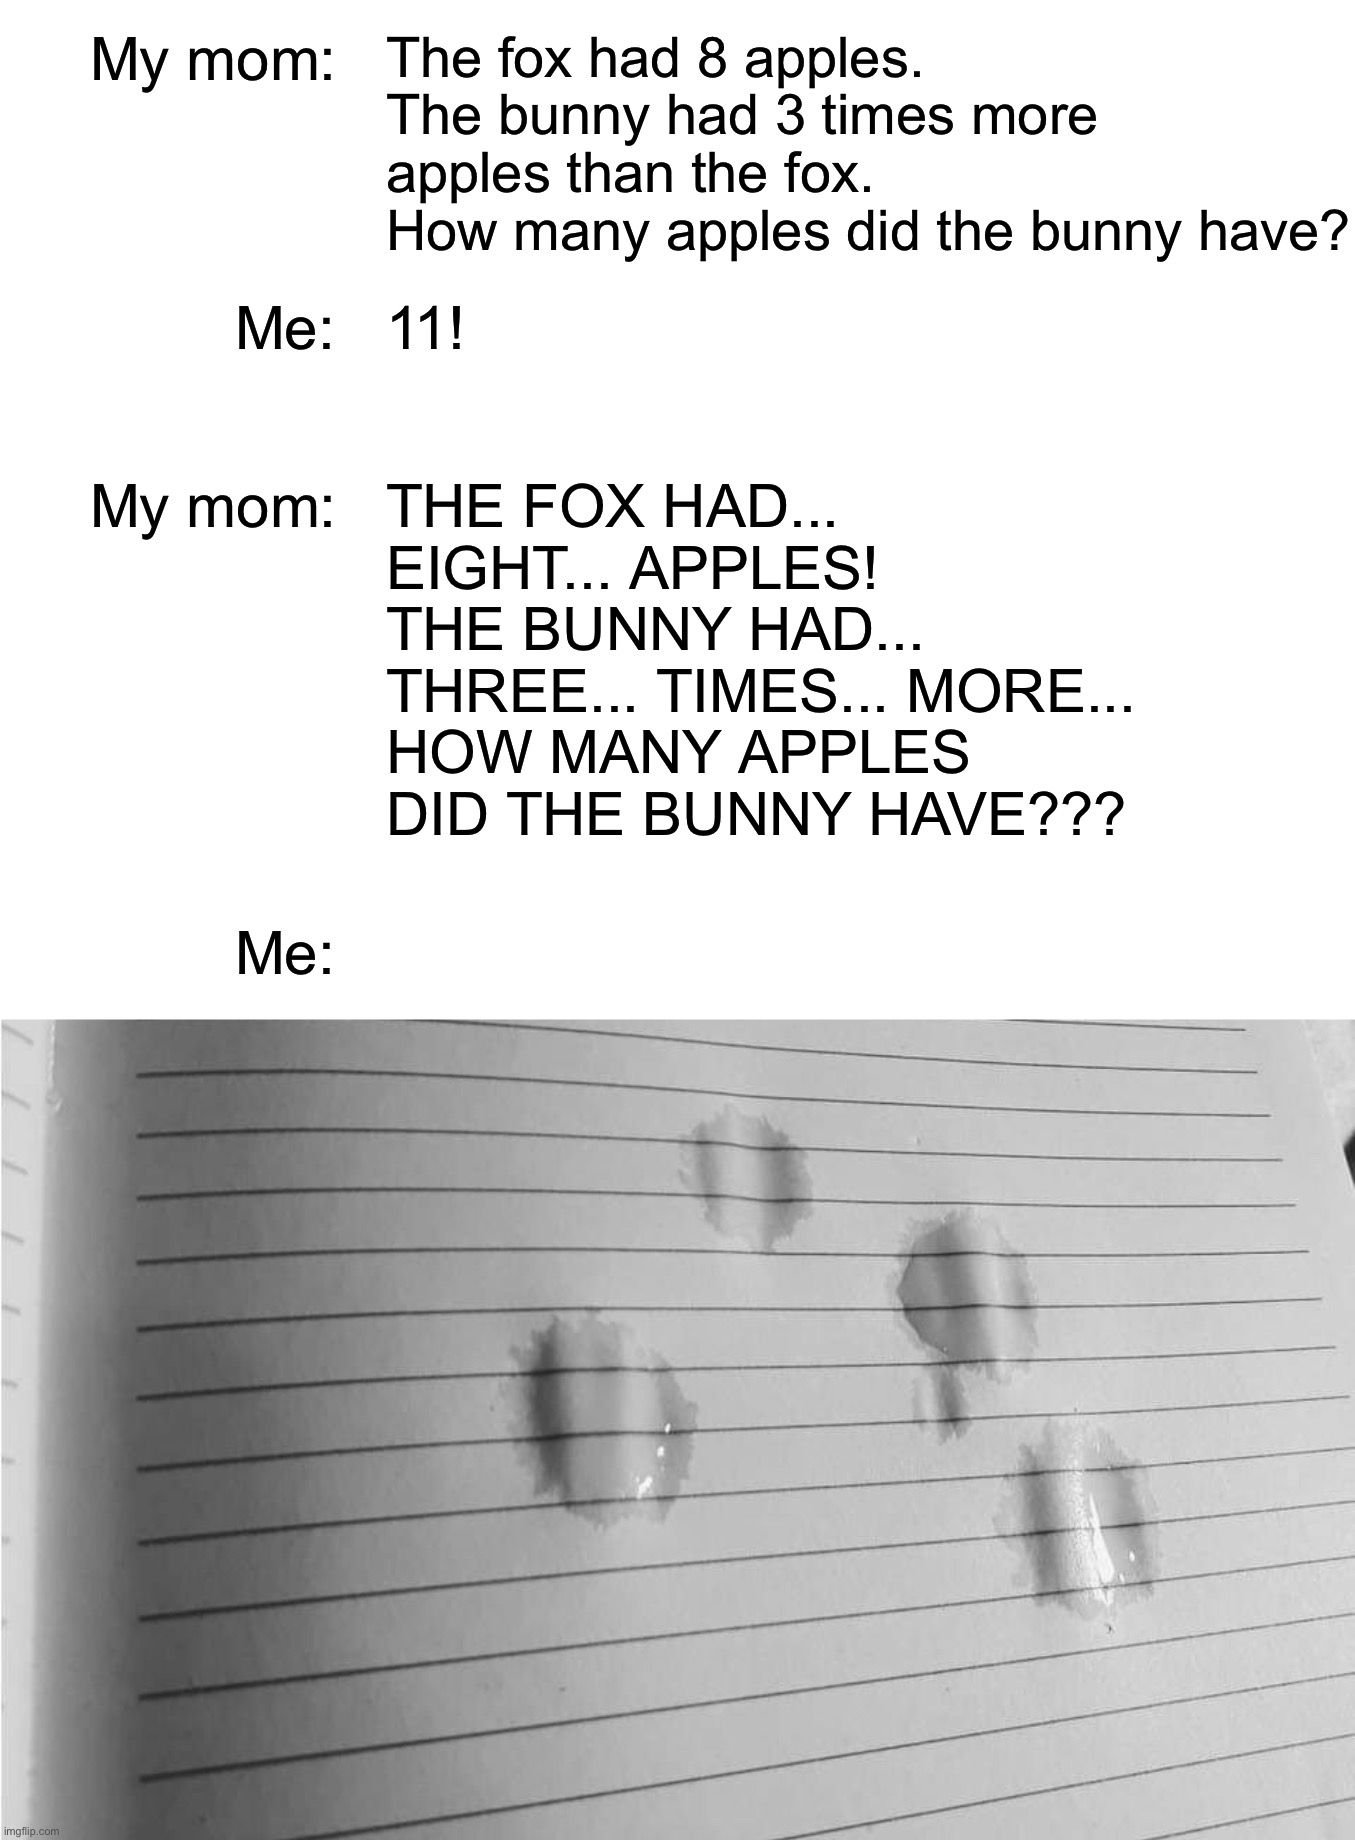 My mom:; The fox had 8 apples. The bunny had 3 times more apples than the fox.
How many apples did the bunny have? Me:; 11! My mom:; THE FOX HAD... EIGHT... APPLES!
THE BUNNY HAD...
THREE... TIMES... MORE...
HOW MANY APPLES DID THE BUNNY HAVE??? Me: | image tagged in memes,school,childhood ruined,funny,homework,sweet memories | made w/ Imgflip meme maker